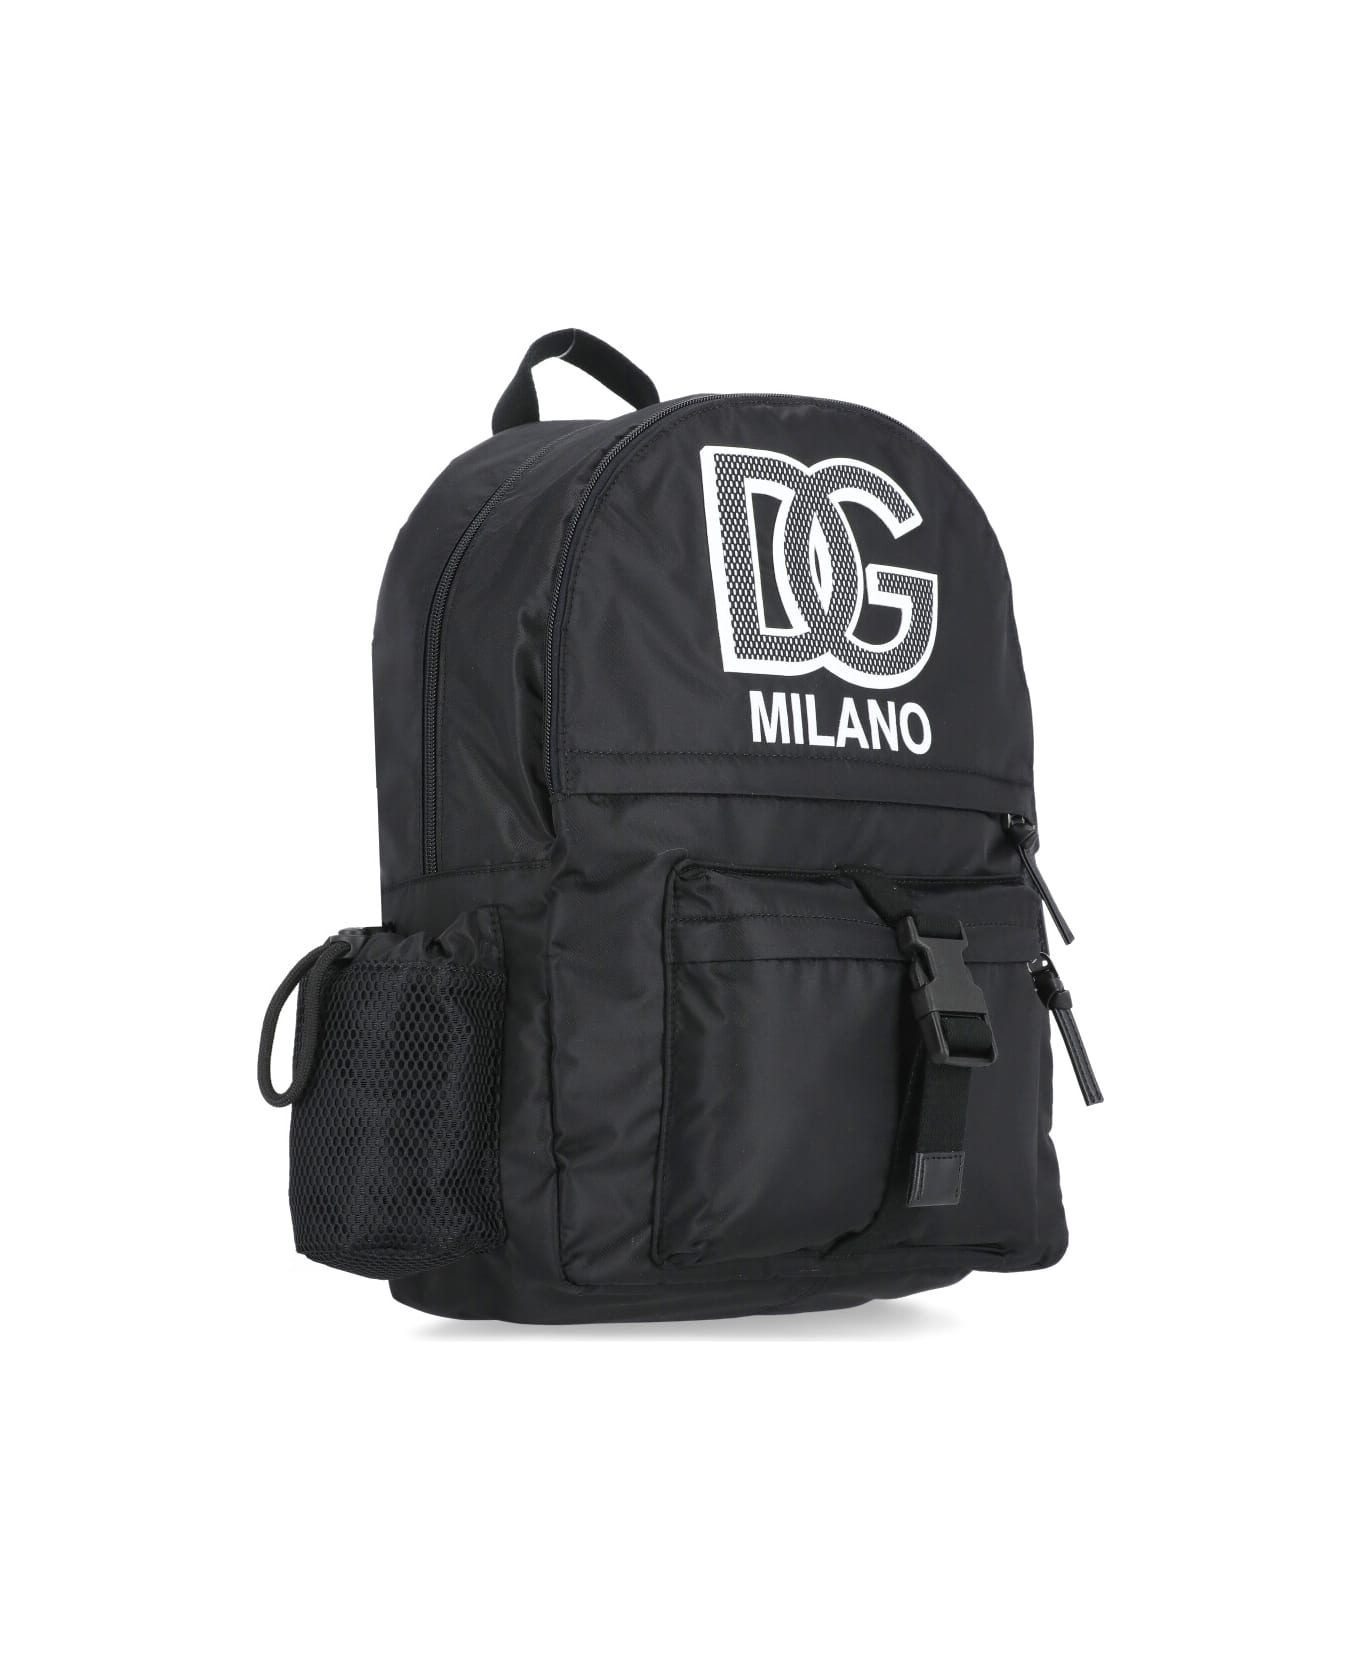 Dolce & Gabbana Backpack With Logo - Black アクセサリー＆ギフト